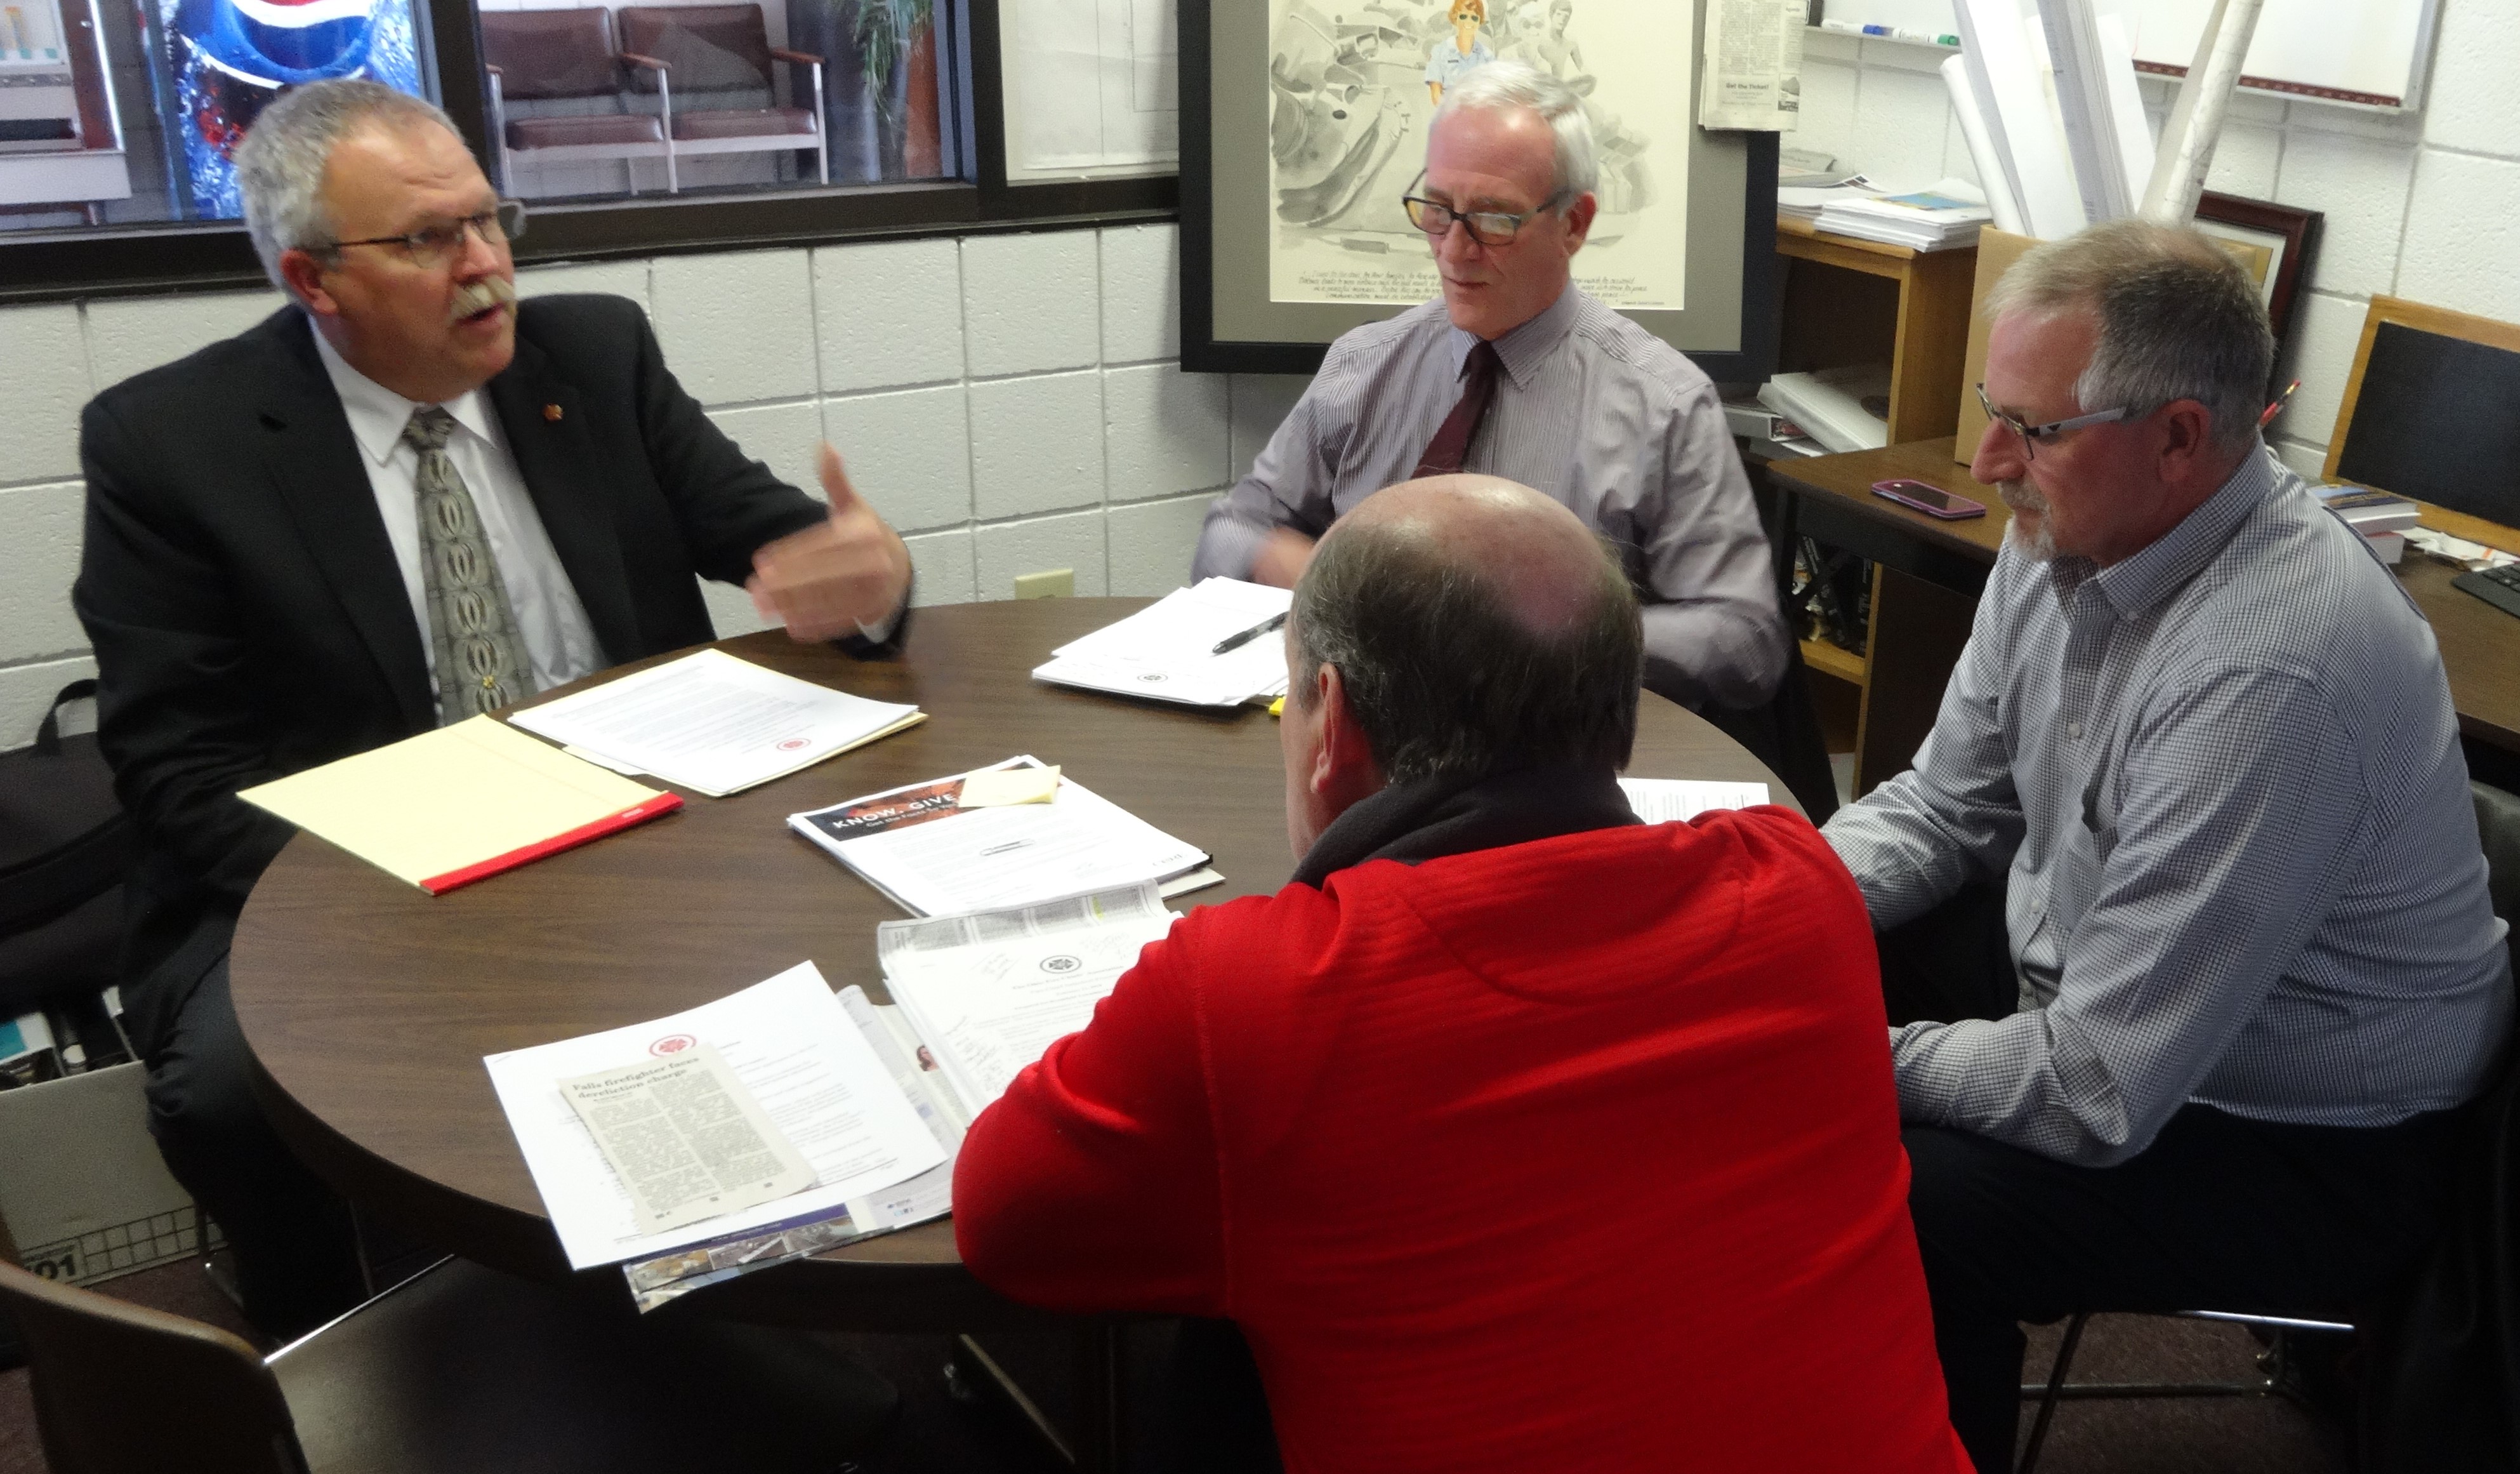 Mitch Ross of the Ohio Fire Chiefs Association, left, meets with Brookfield trustees, clockwise from his left, Dan Suttles, Ron Haun and Gary Lees.